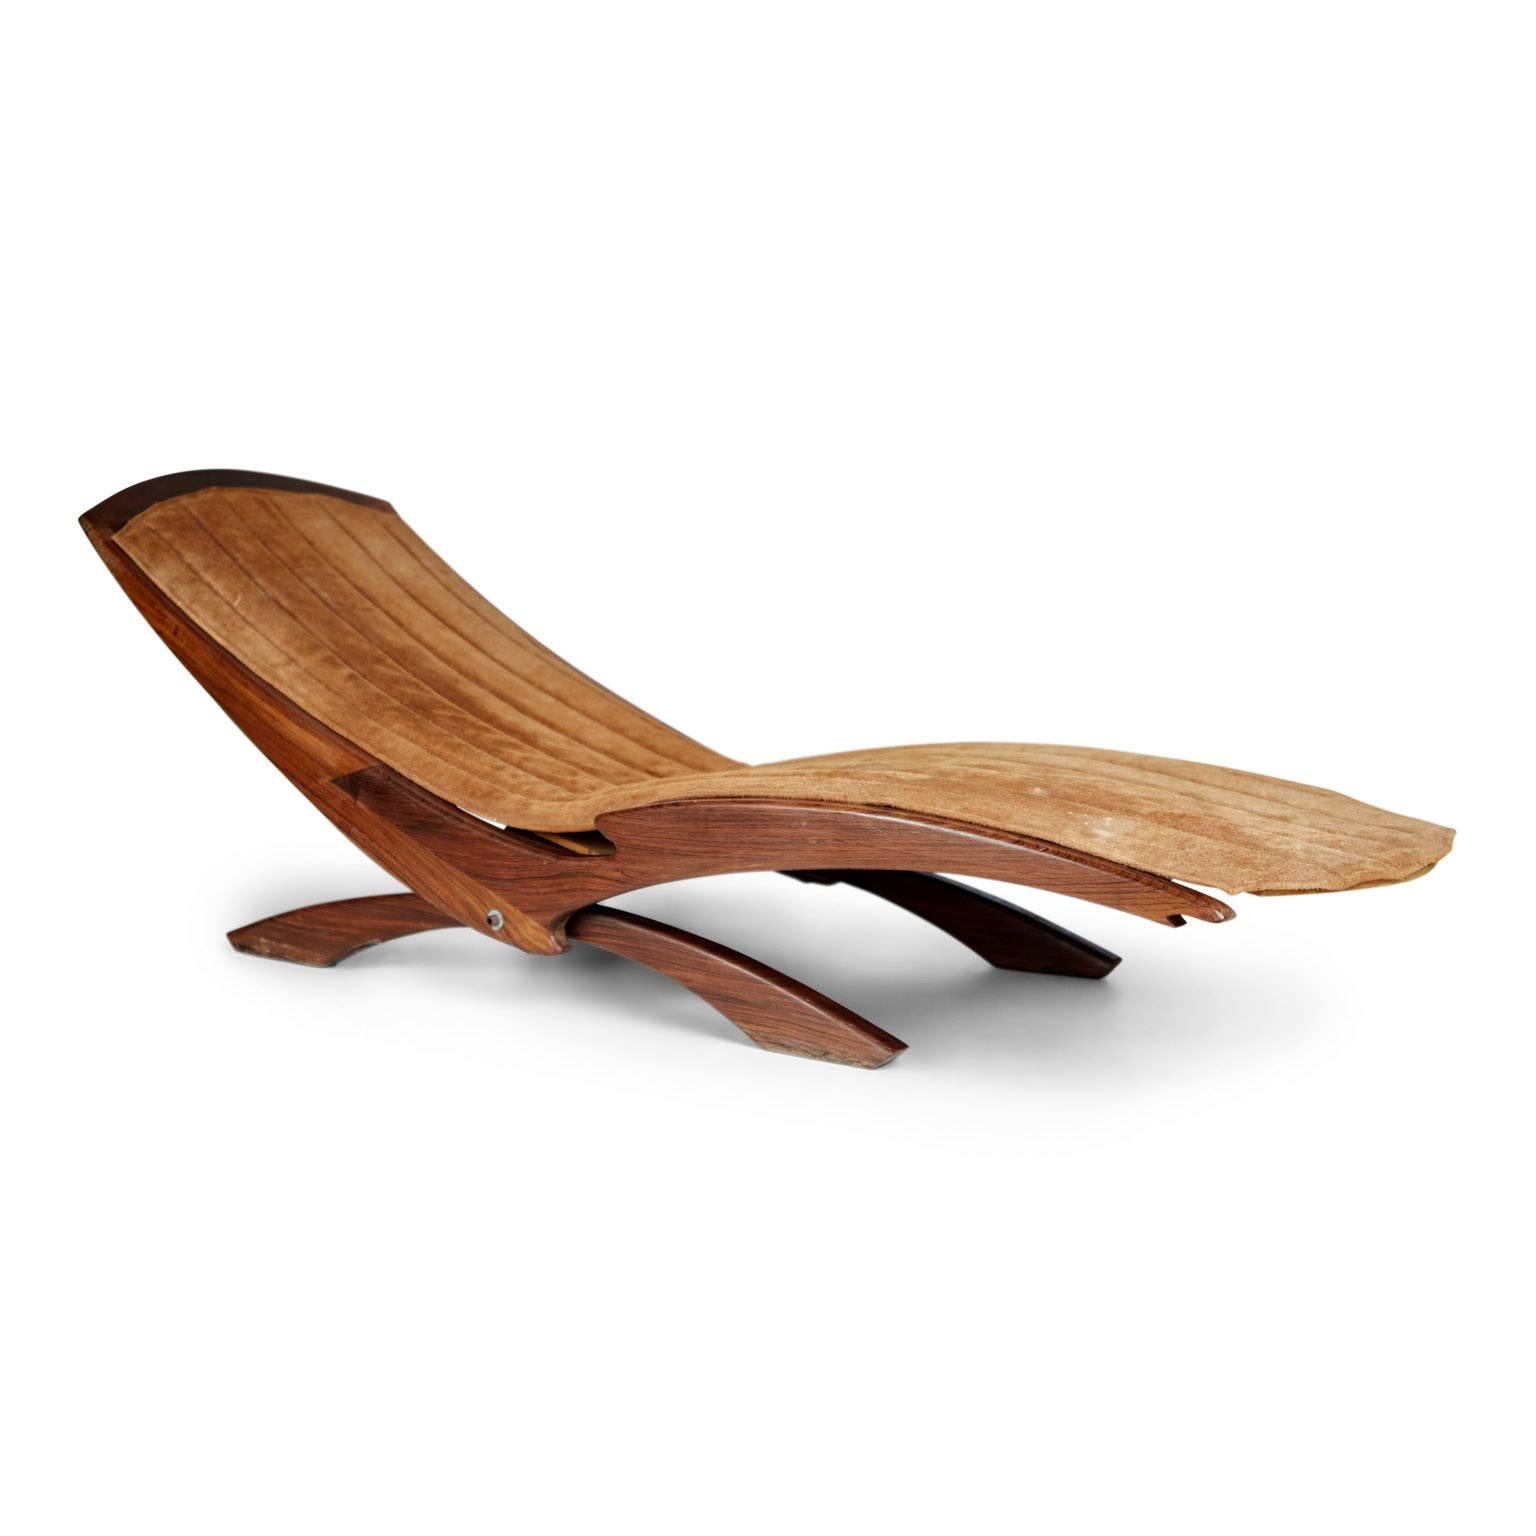 Recently imported from a private collection in Brazil that included many items from Jorge Zalszupin, Sergio Rodrigues, Percival Lafer, and other coveted Brazilian designs, this opulent lounger oozes sophistication and finesse. The sleekly